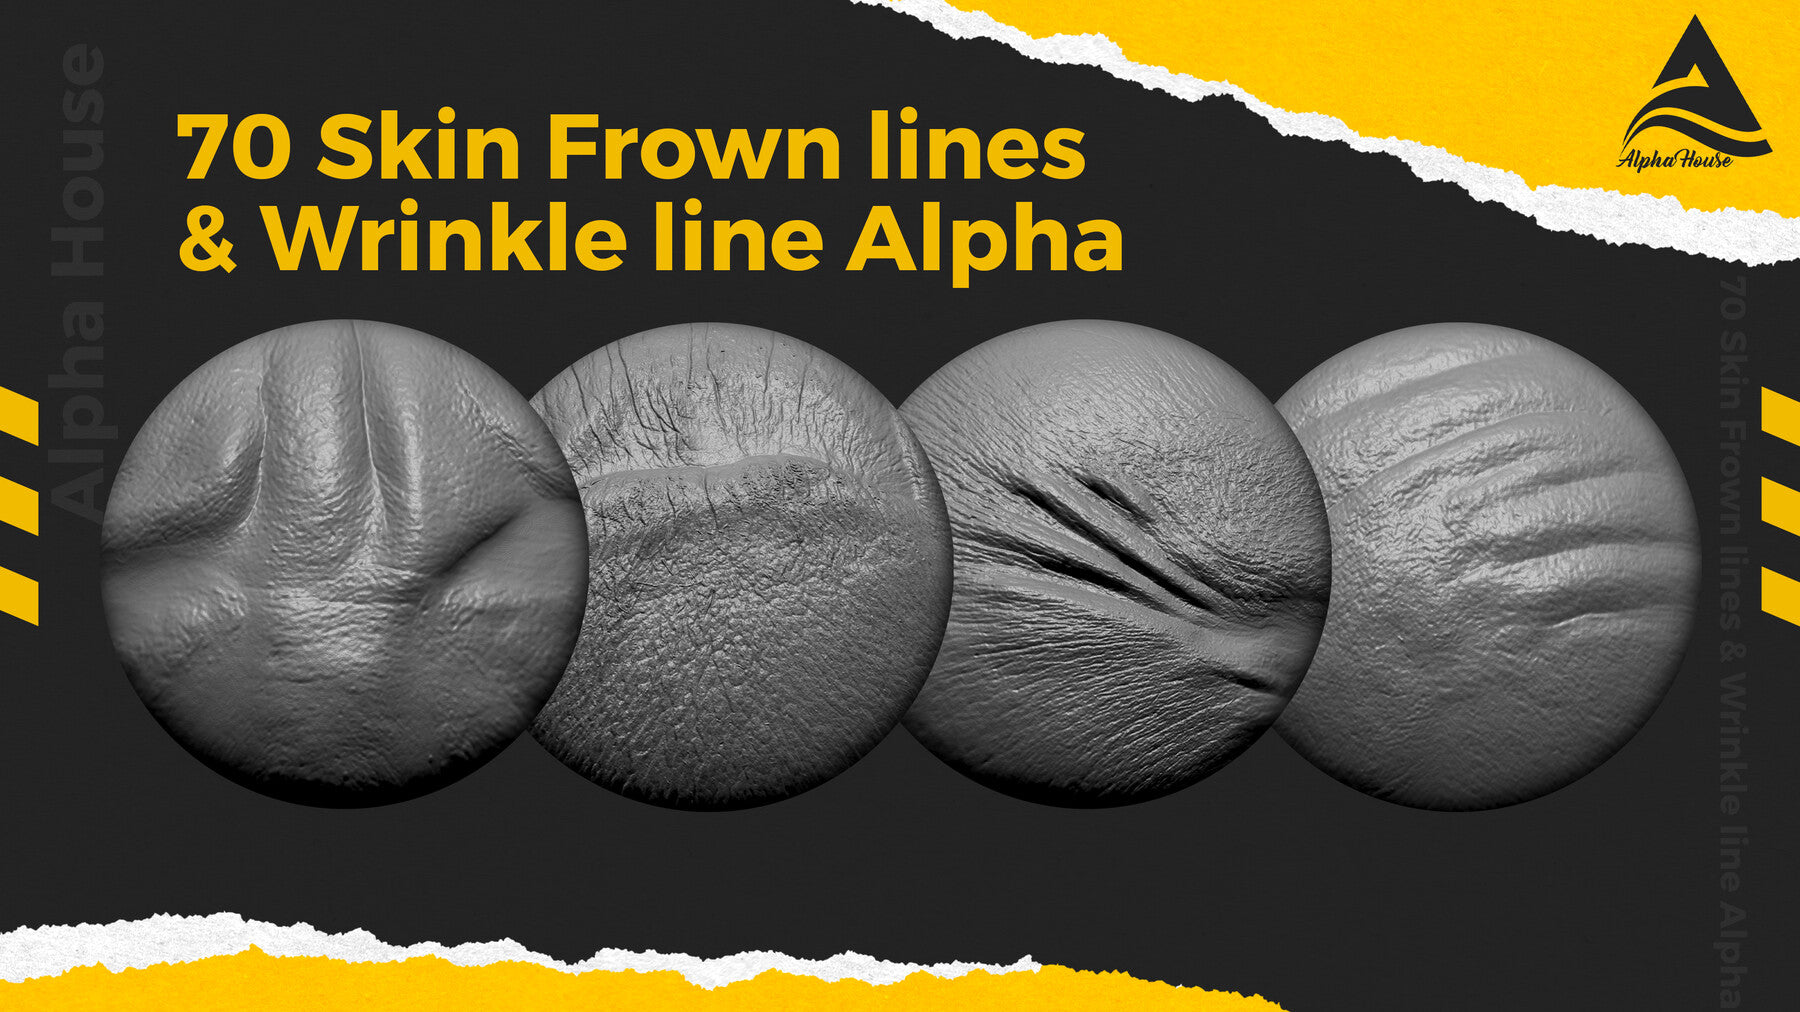 70 Skin Frown lines and Wrinkle line Alpha